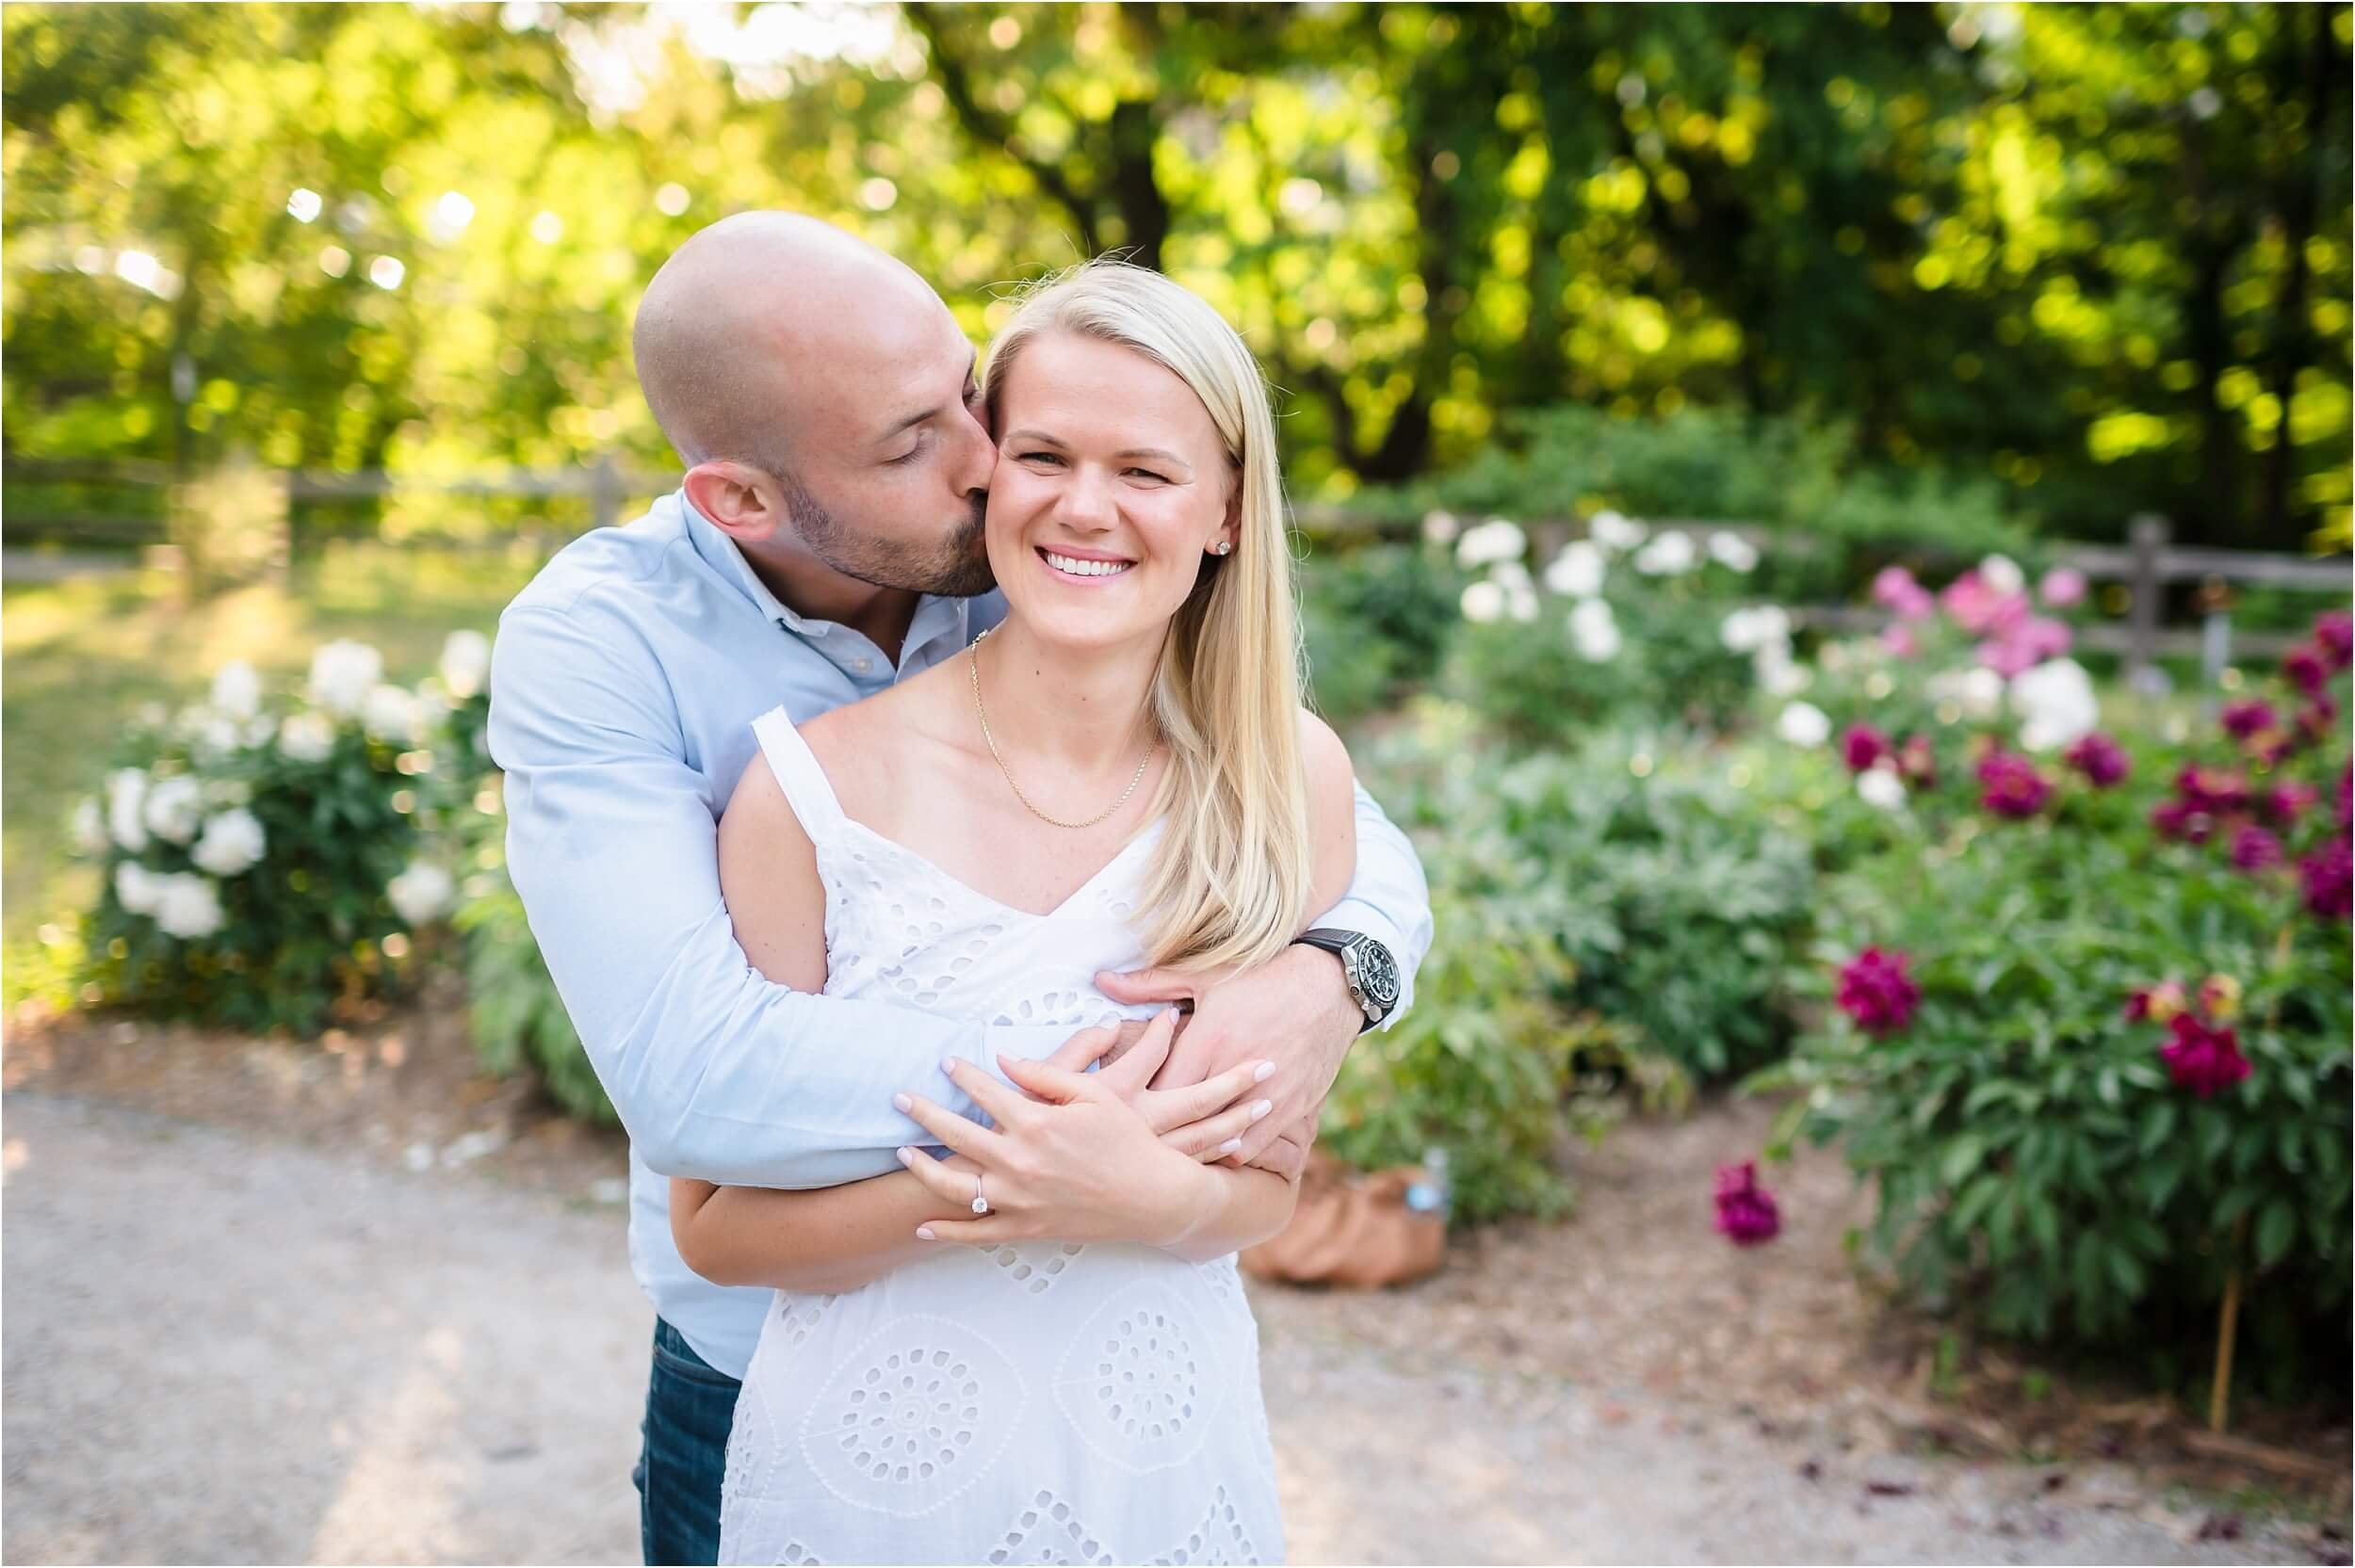  A man embraces his fiance during their sunset engagement session at The Arb Peony Garden.  